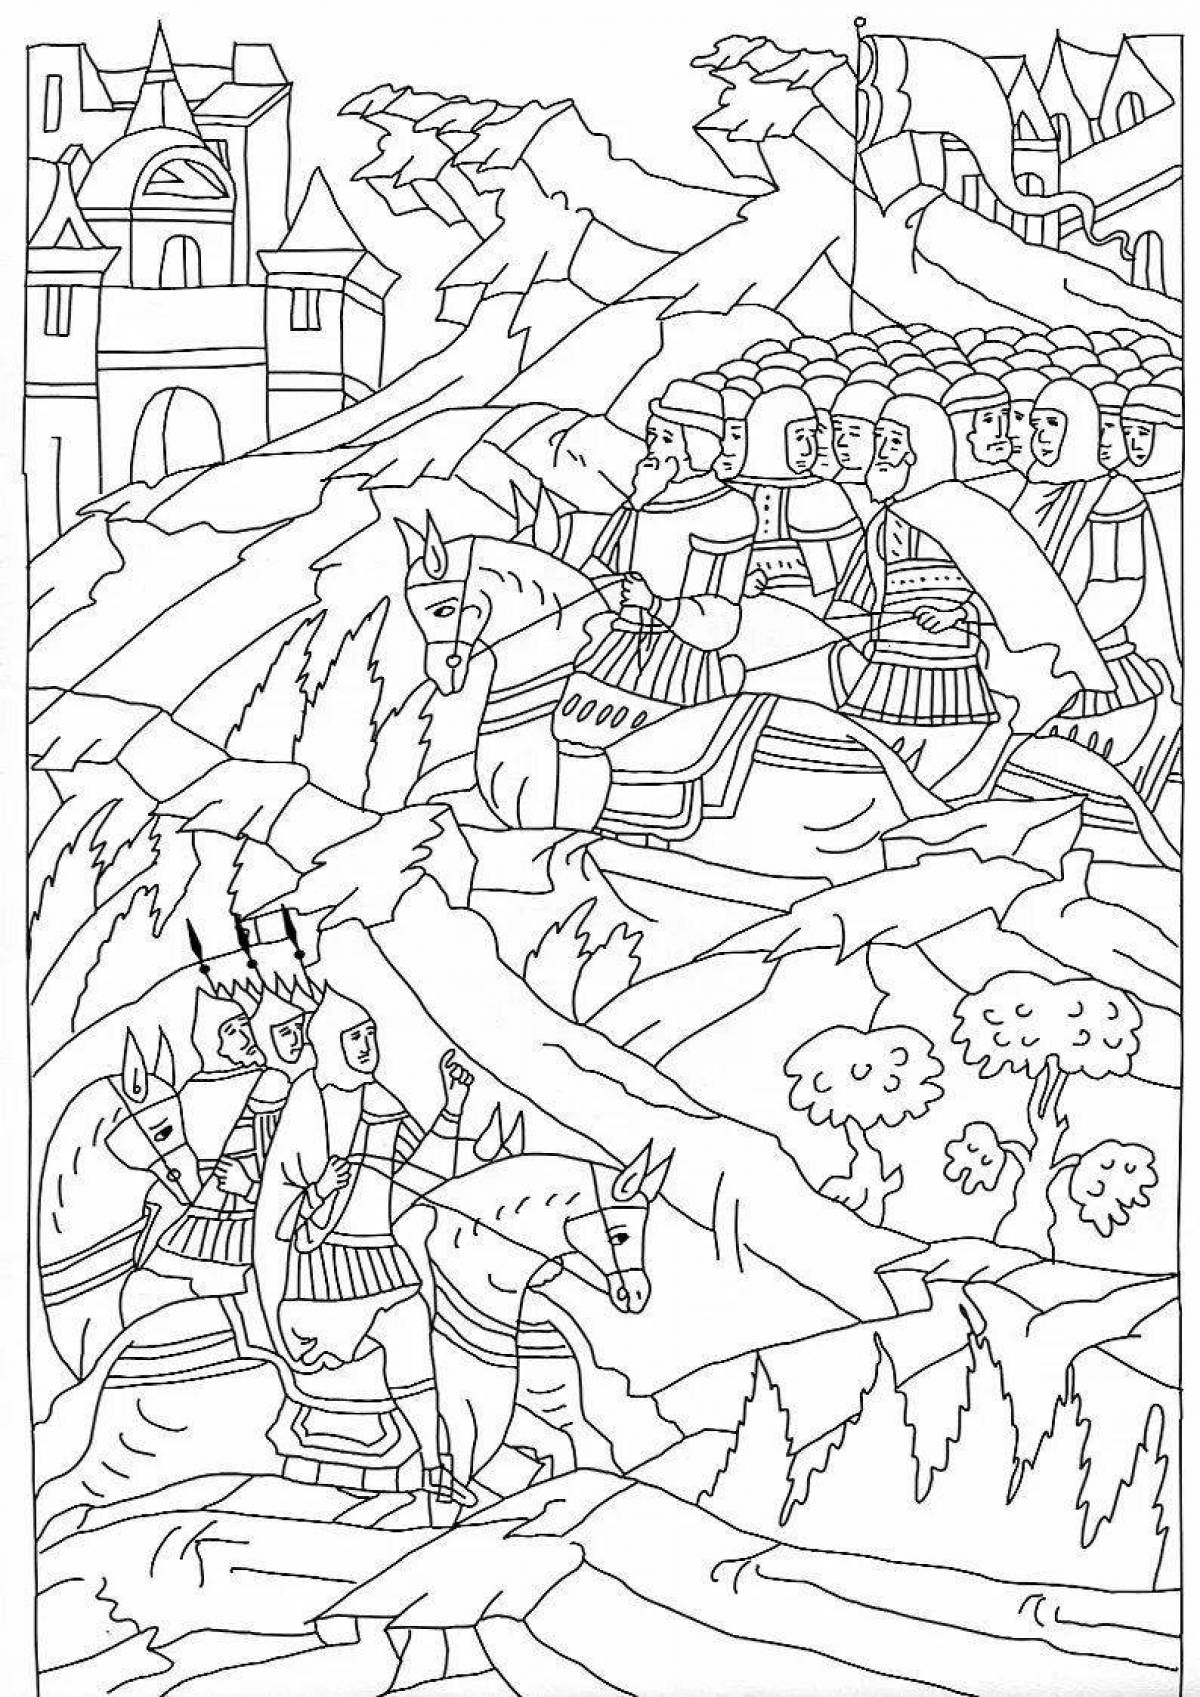 Brilliantly illustrated battle on ice coloring page